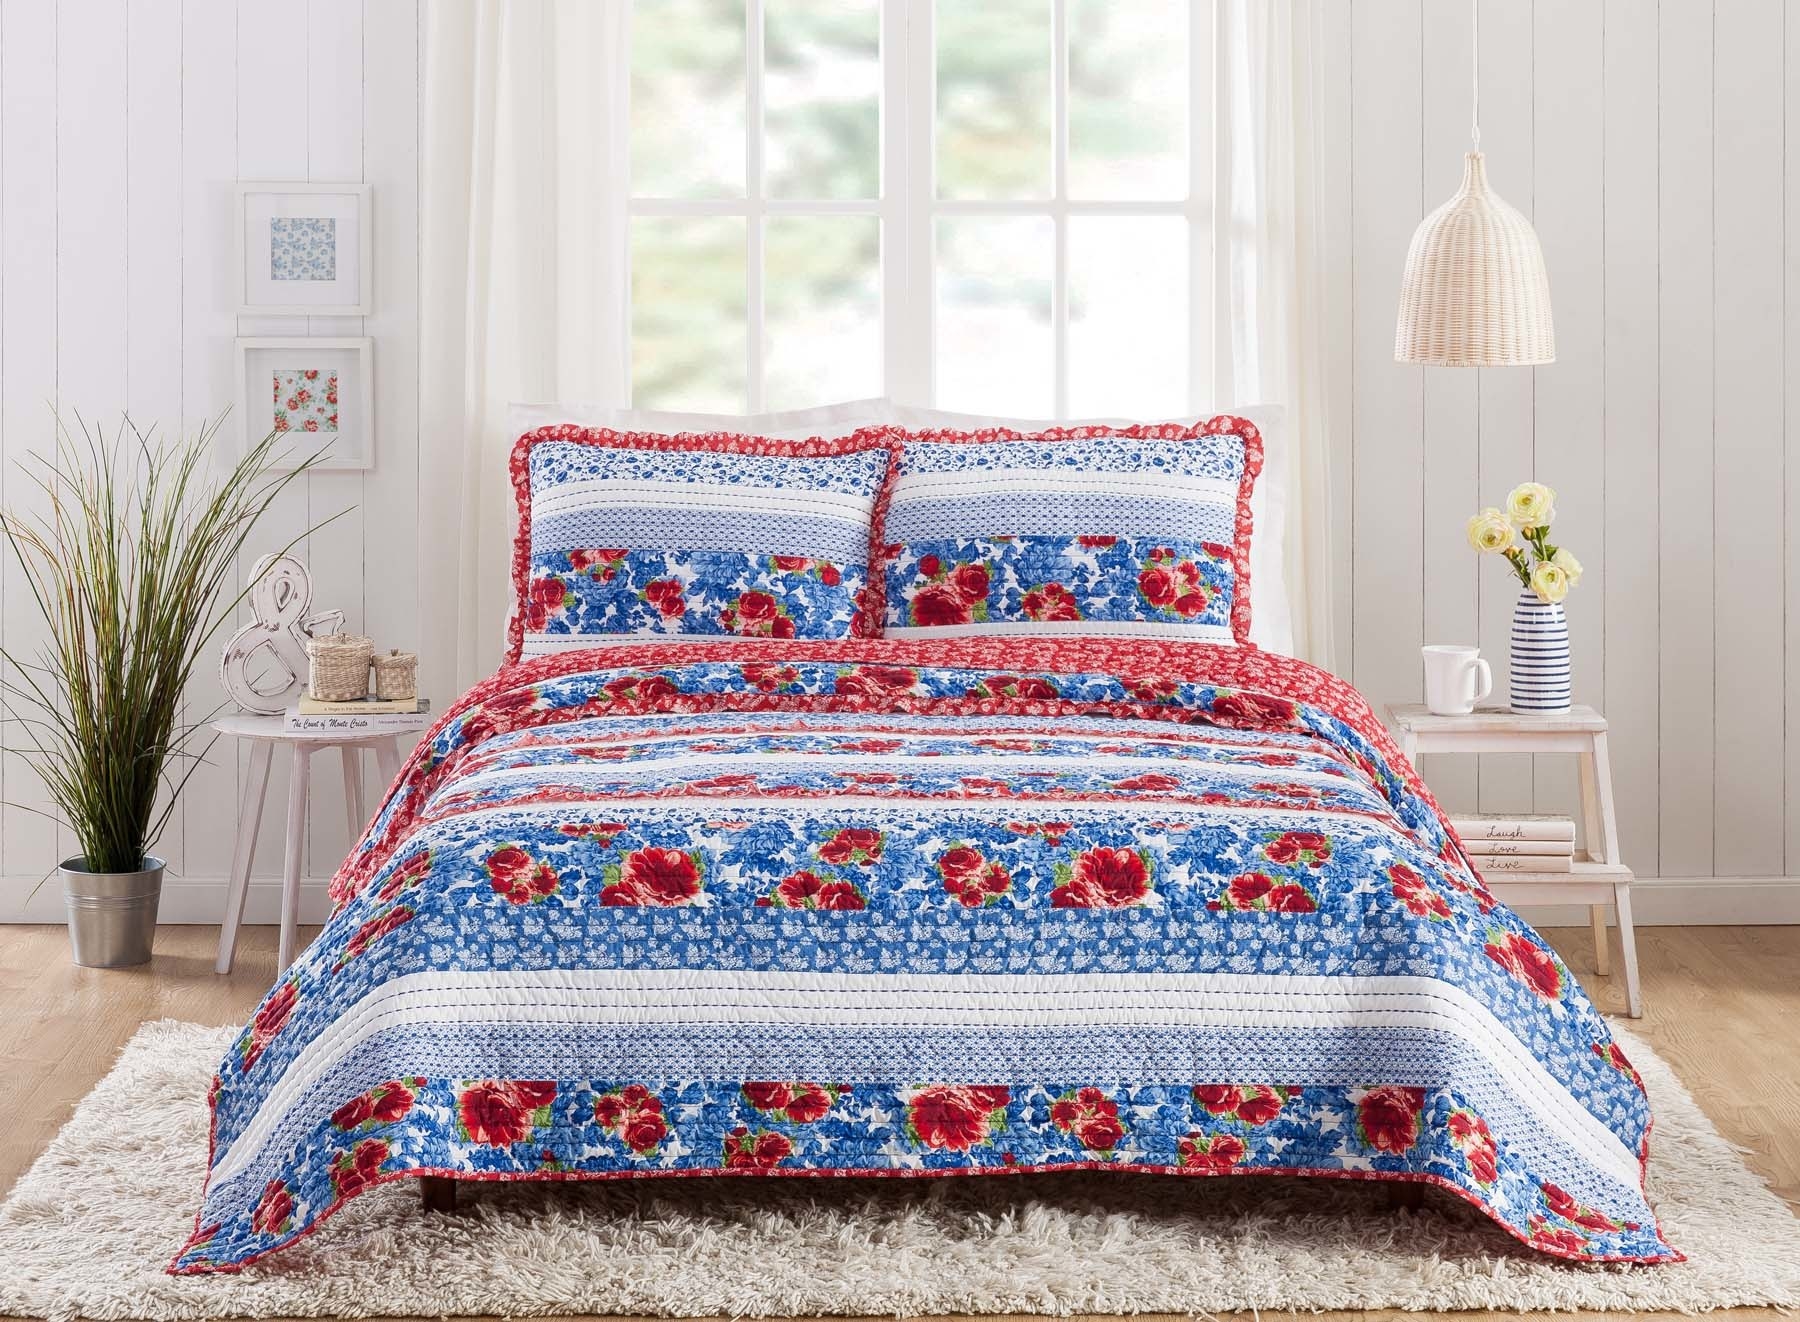 The set on a bed, looking great. It has bands of fabric in shades of blue with red accents. Some of the patterns are floral, and some are geometric.